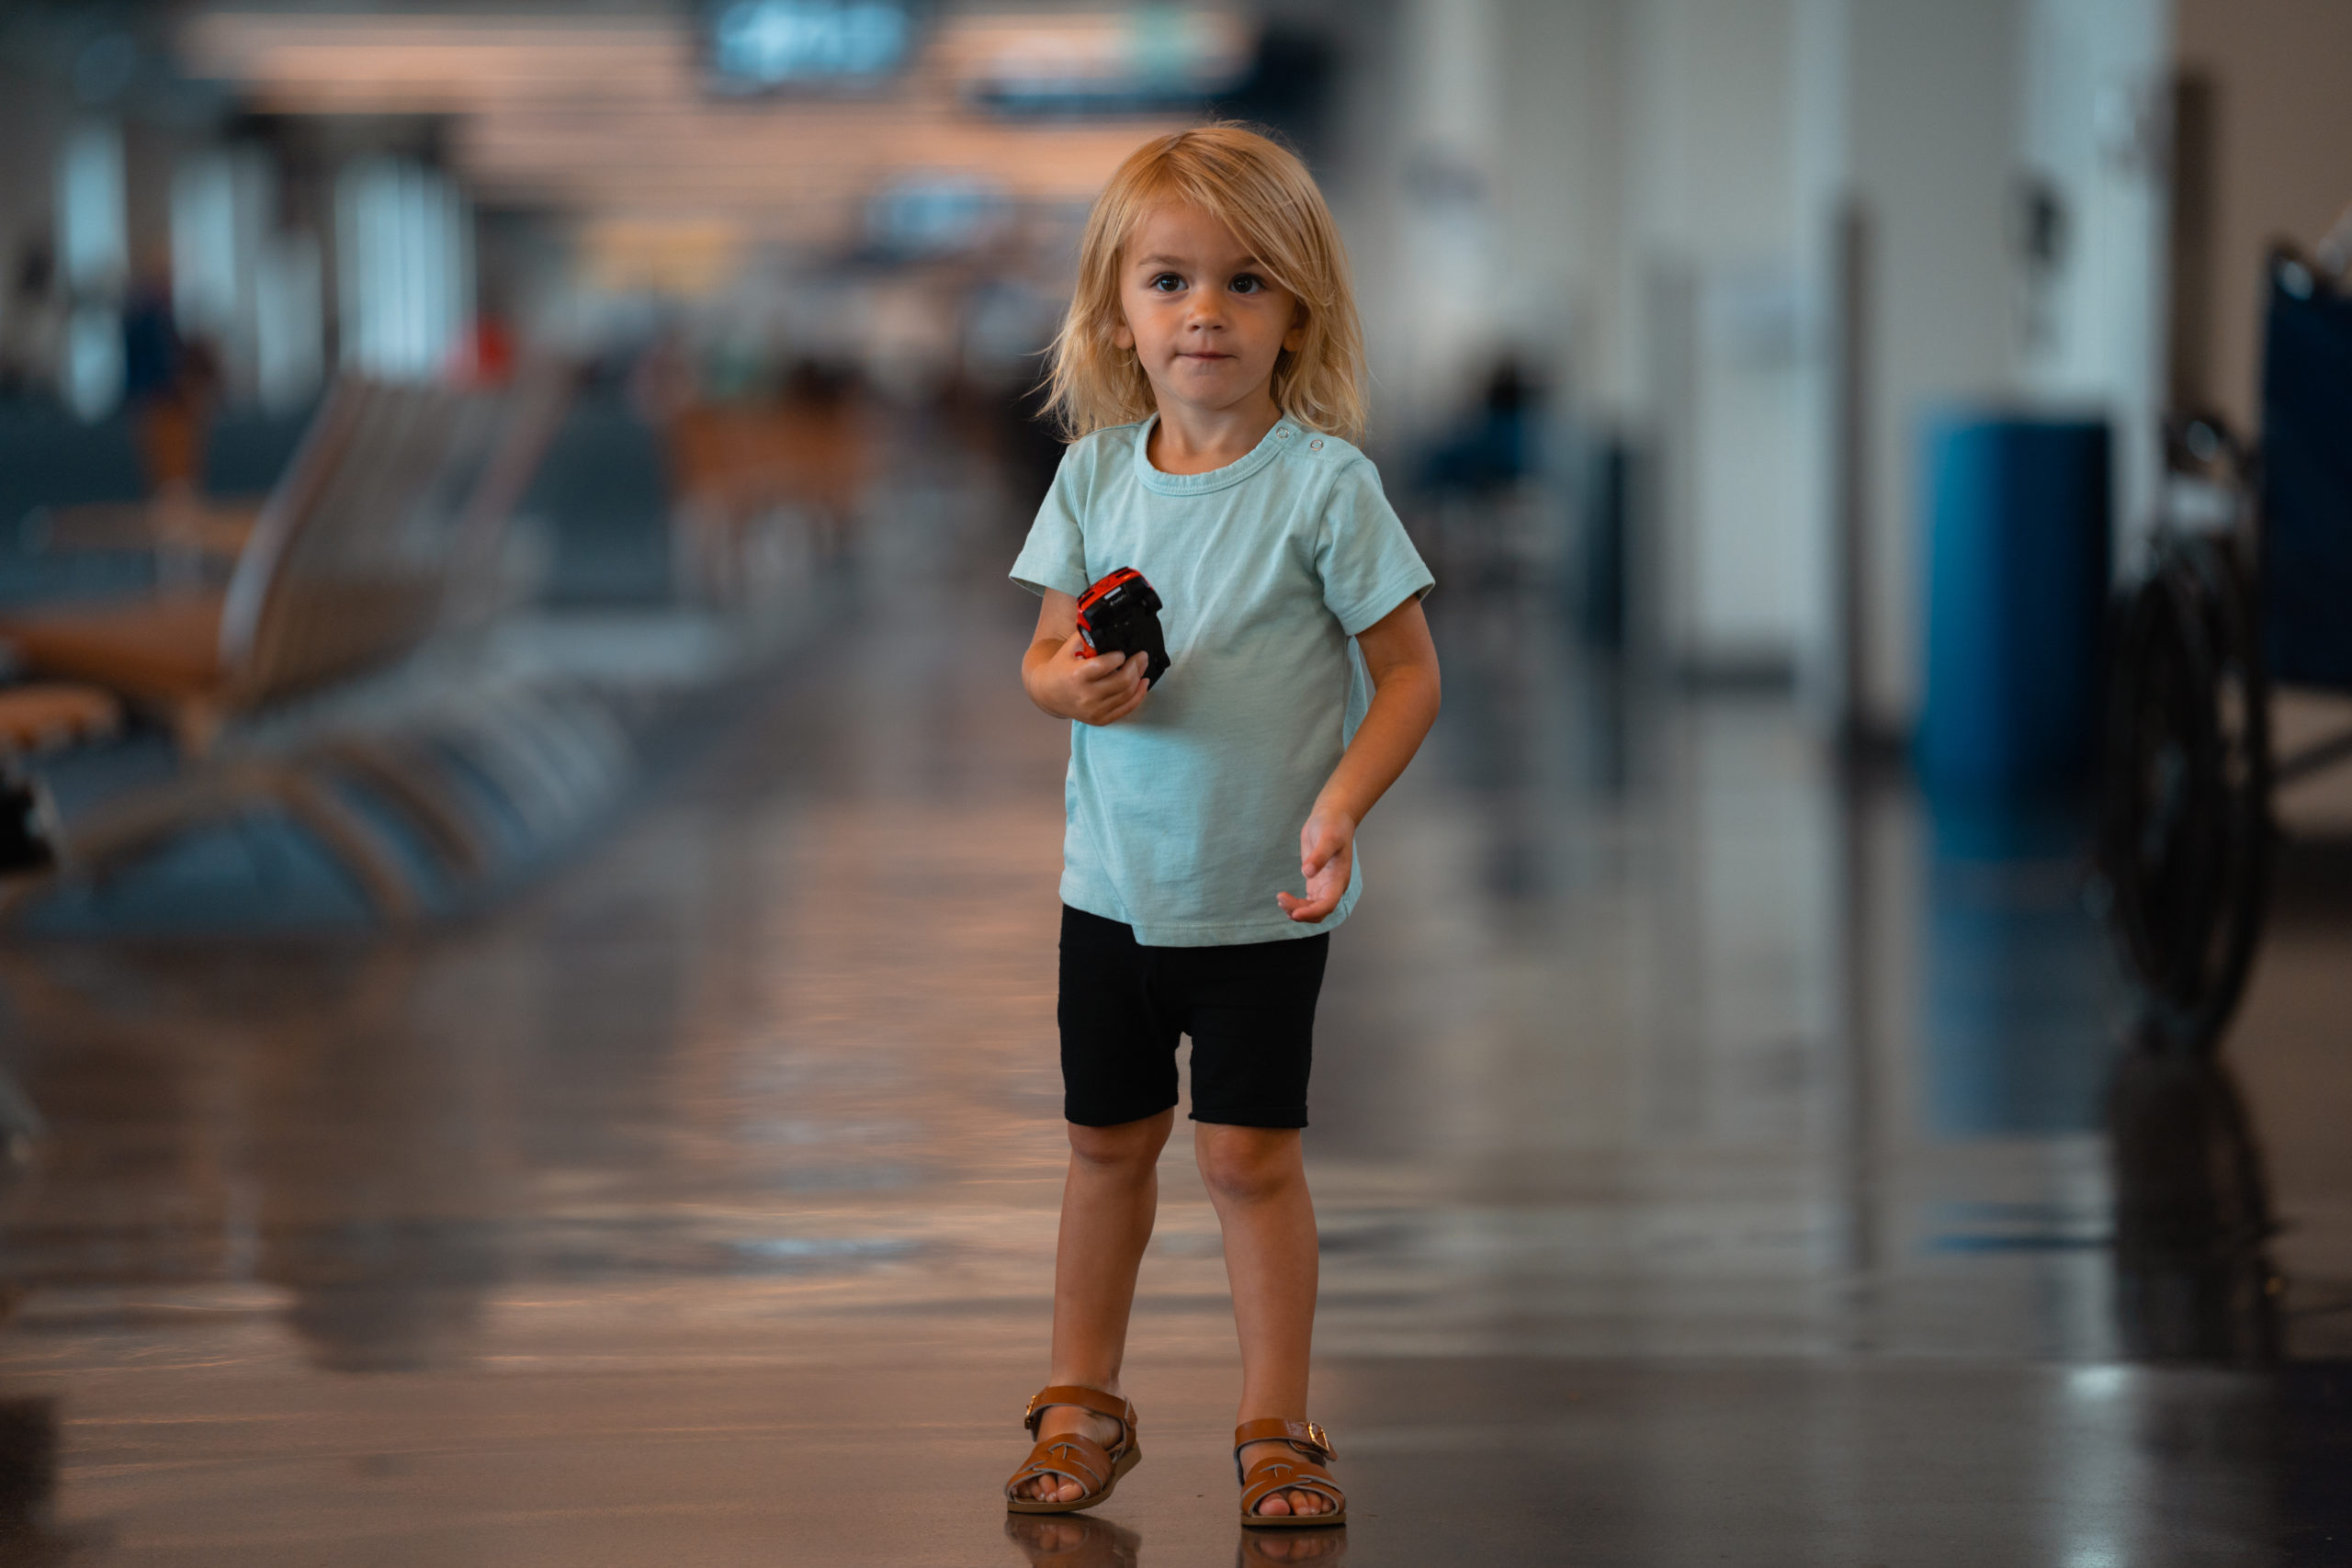 child holding car in airport terminal